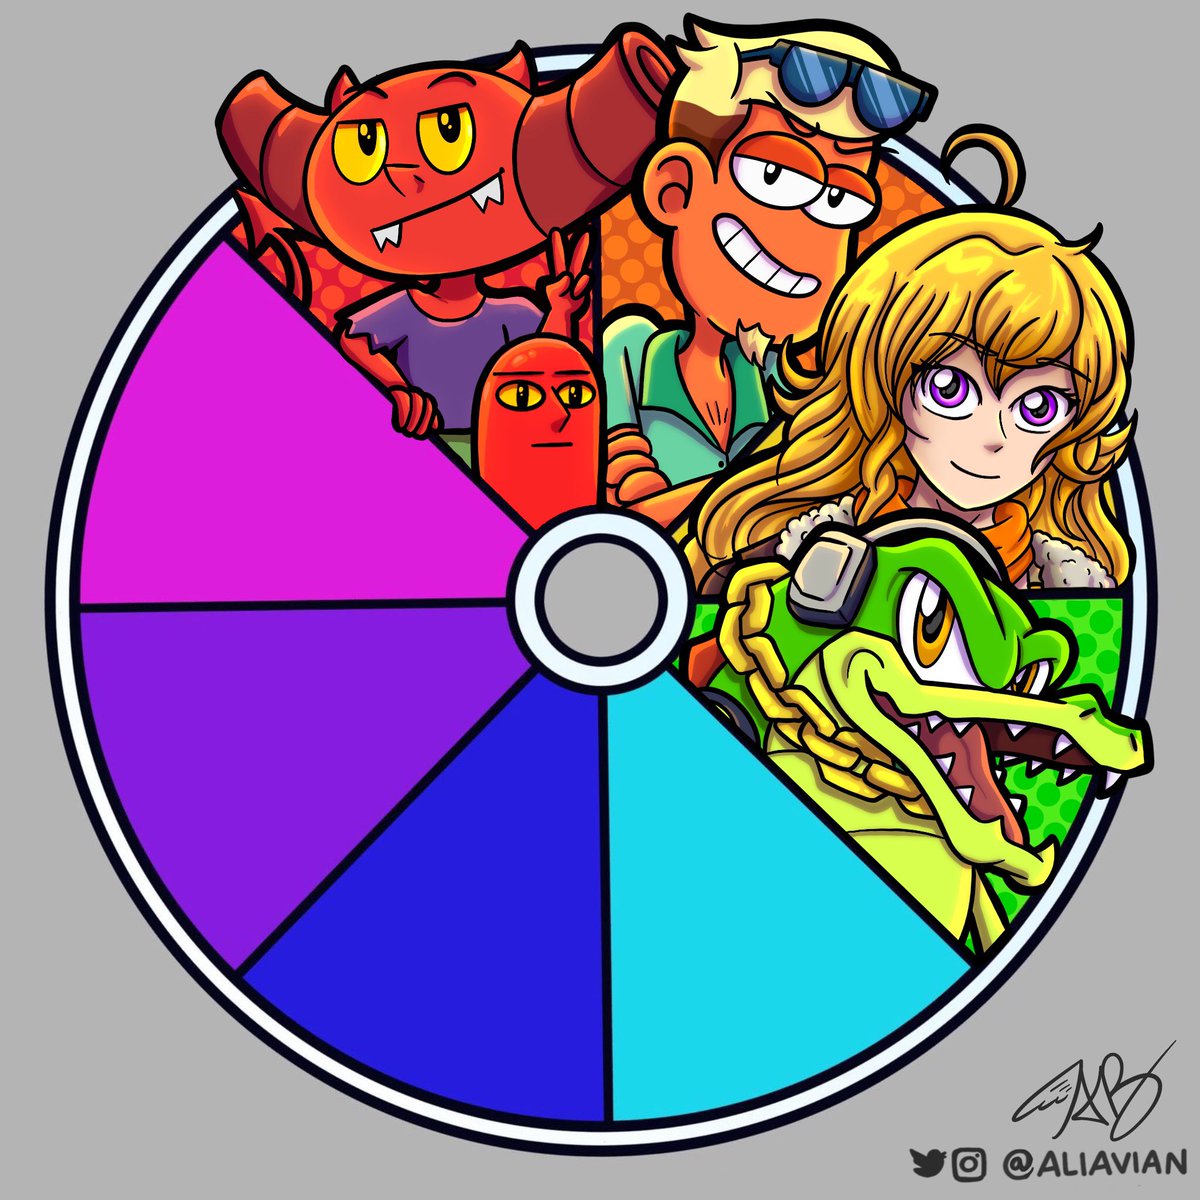 Okay I immediately liked the suggestion for Vector the Crocodile from Sonic the Hedgehog, mostly because his head just fit the pie shape for the green spot perfectly! 😂💚
Taking suggestions for light blue section next! 🥰

#colorwheelchallenge #colorwheel #fanartchallenge